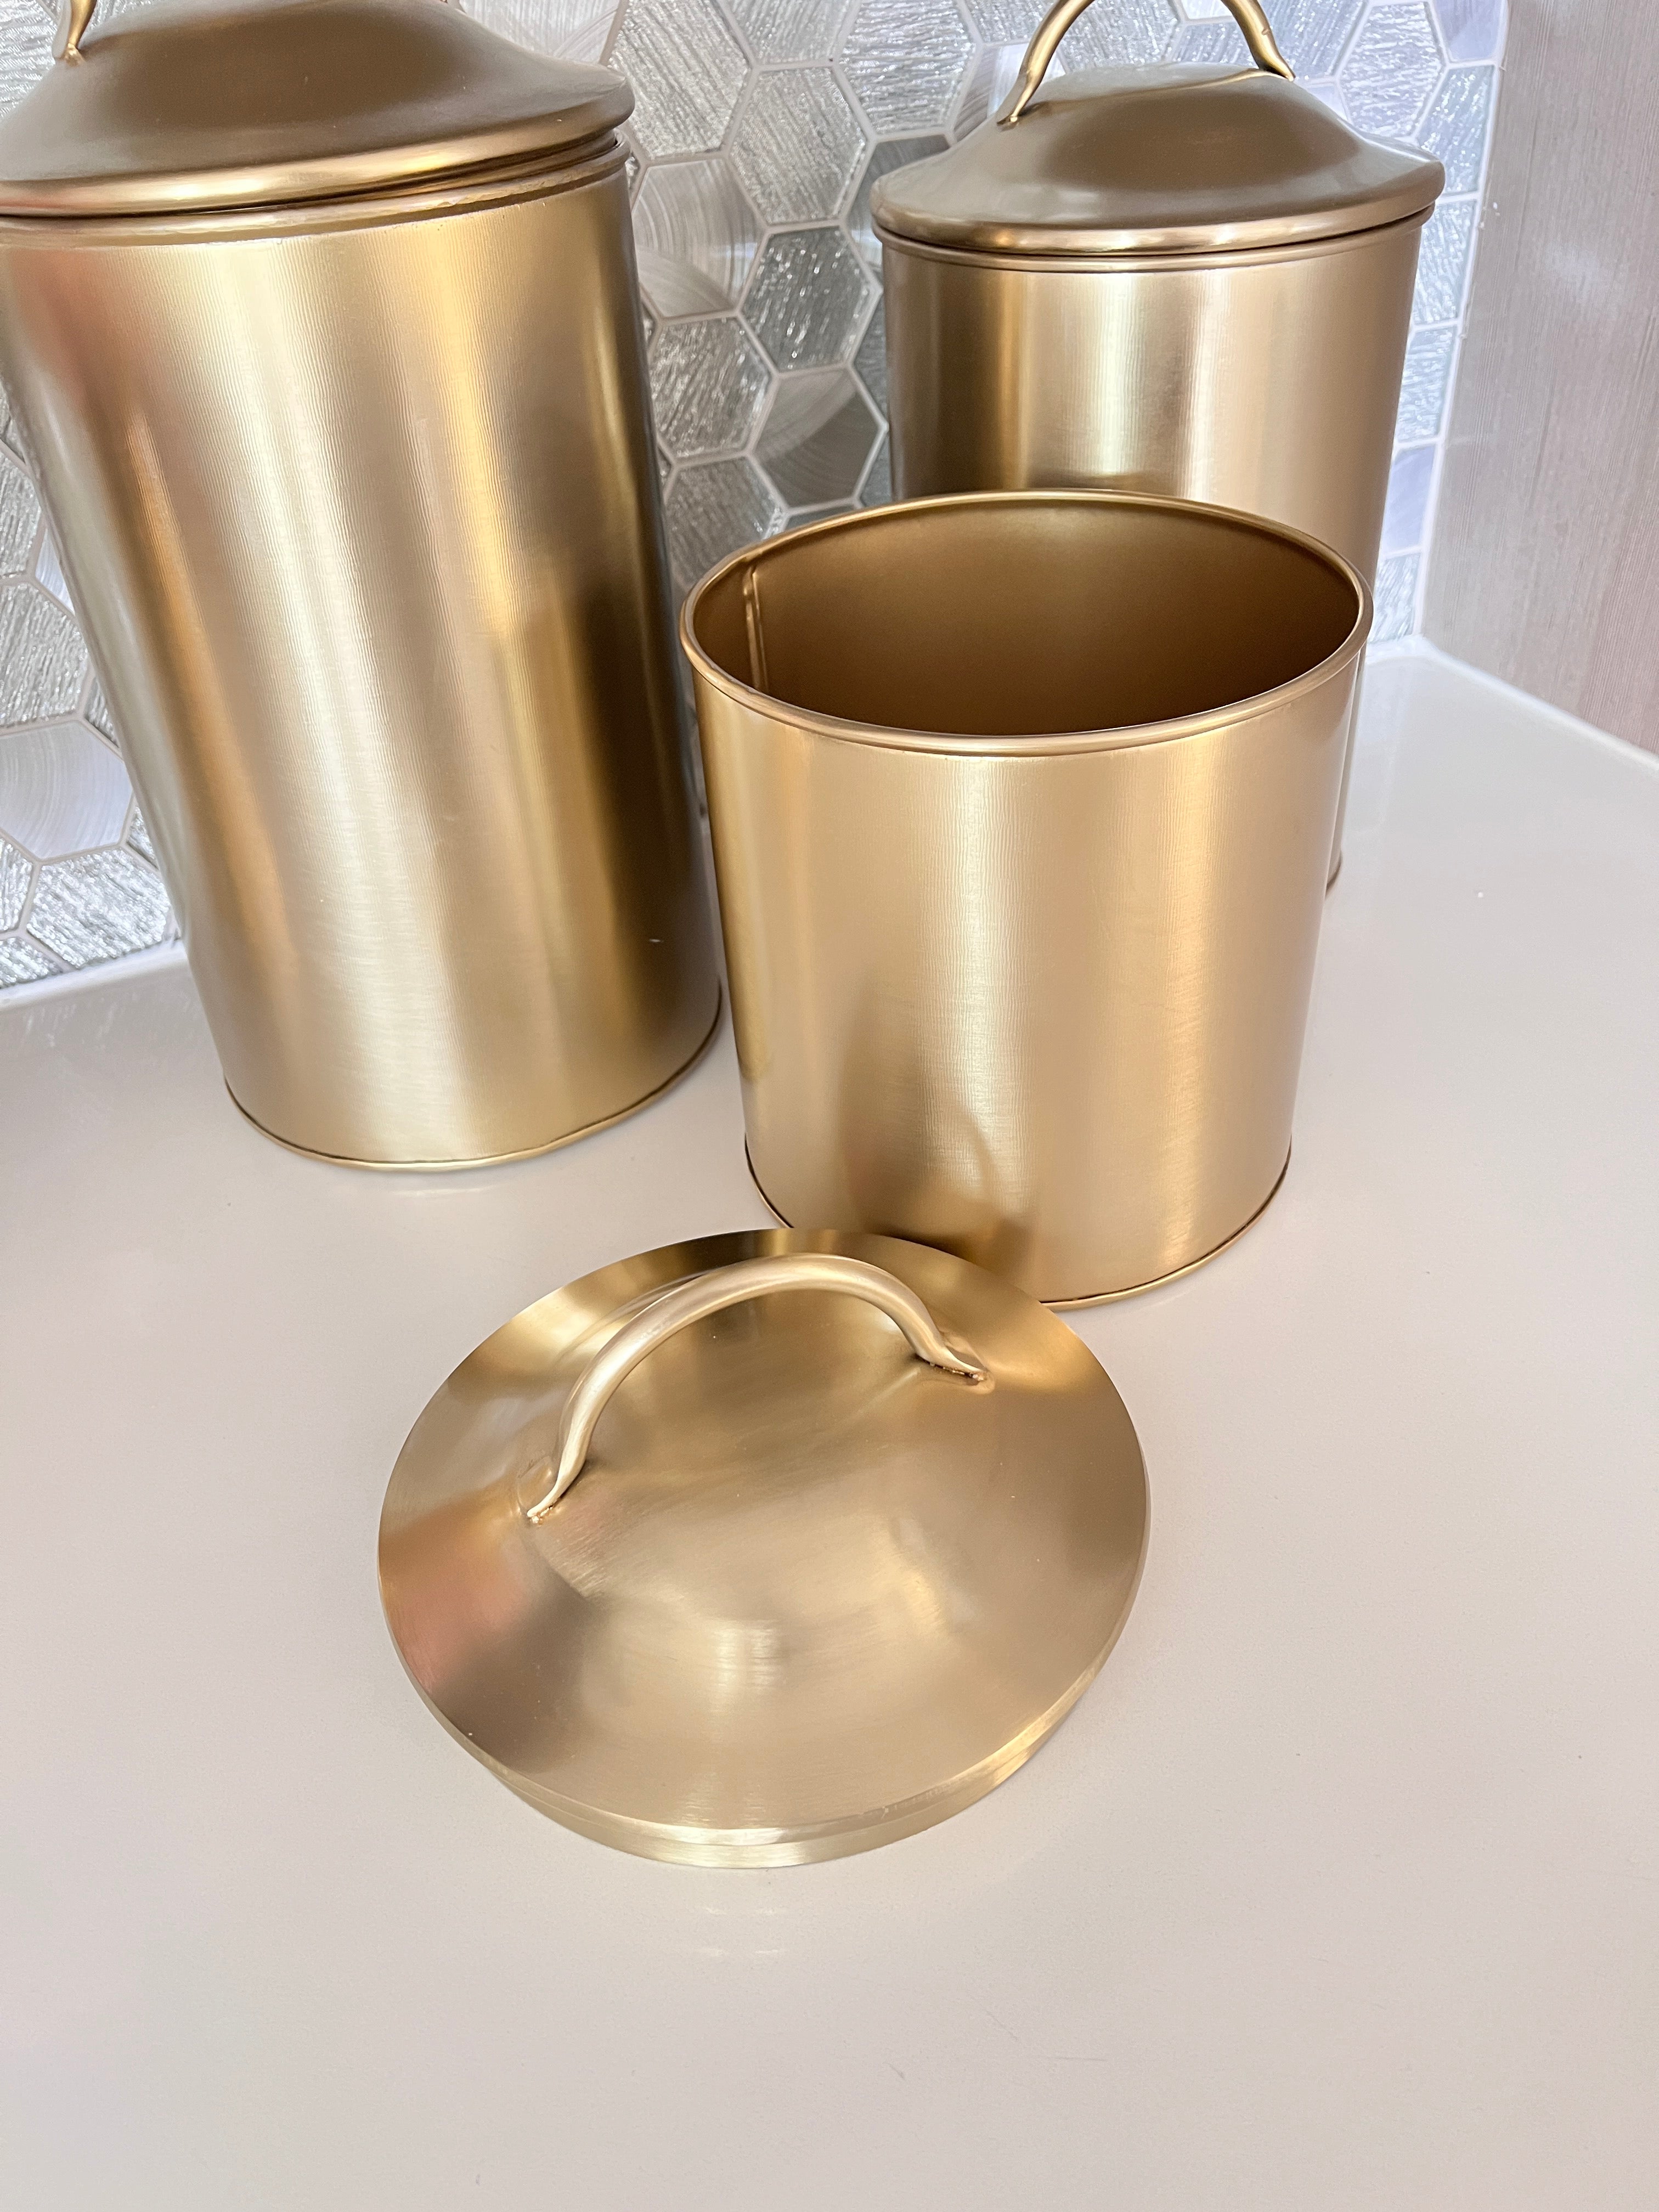 Gold Metal Pantry Canister (Set of 3) - HTS HOME DECOR